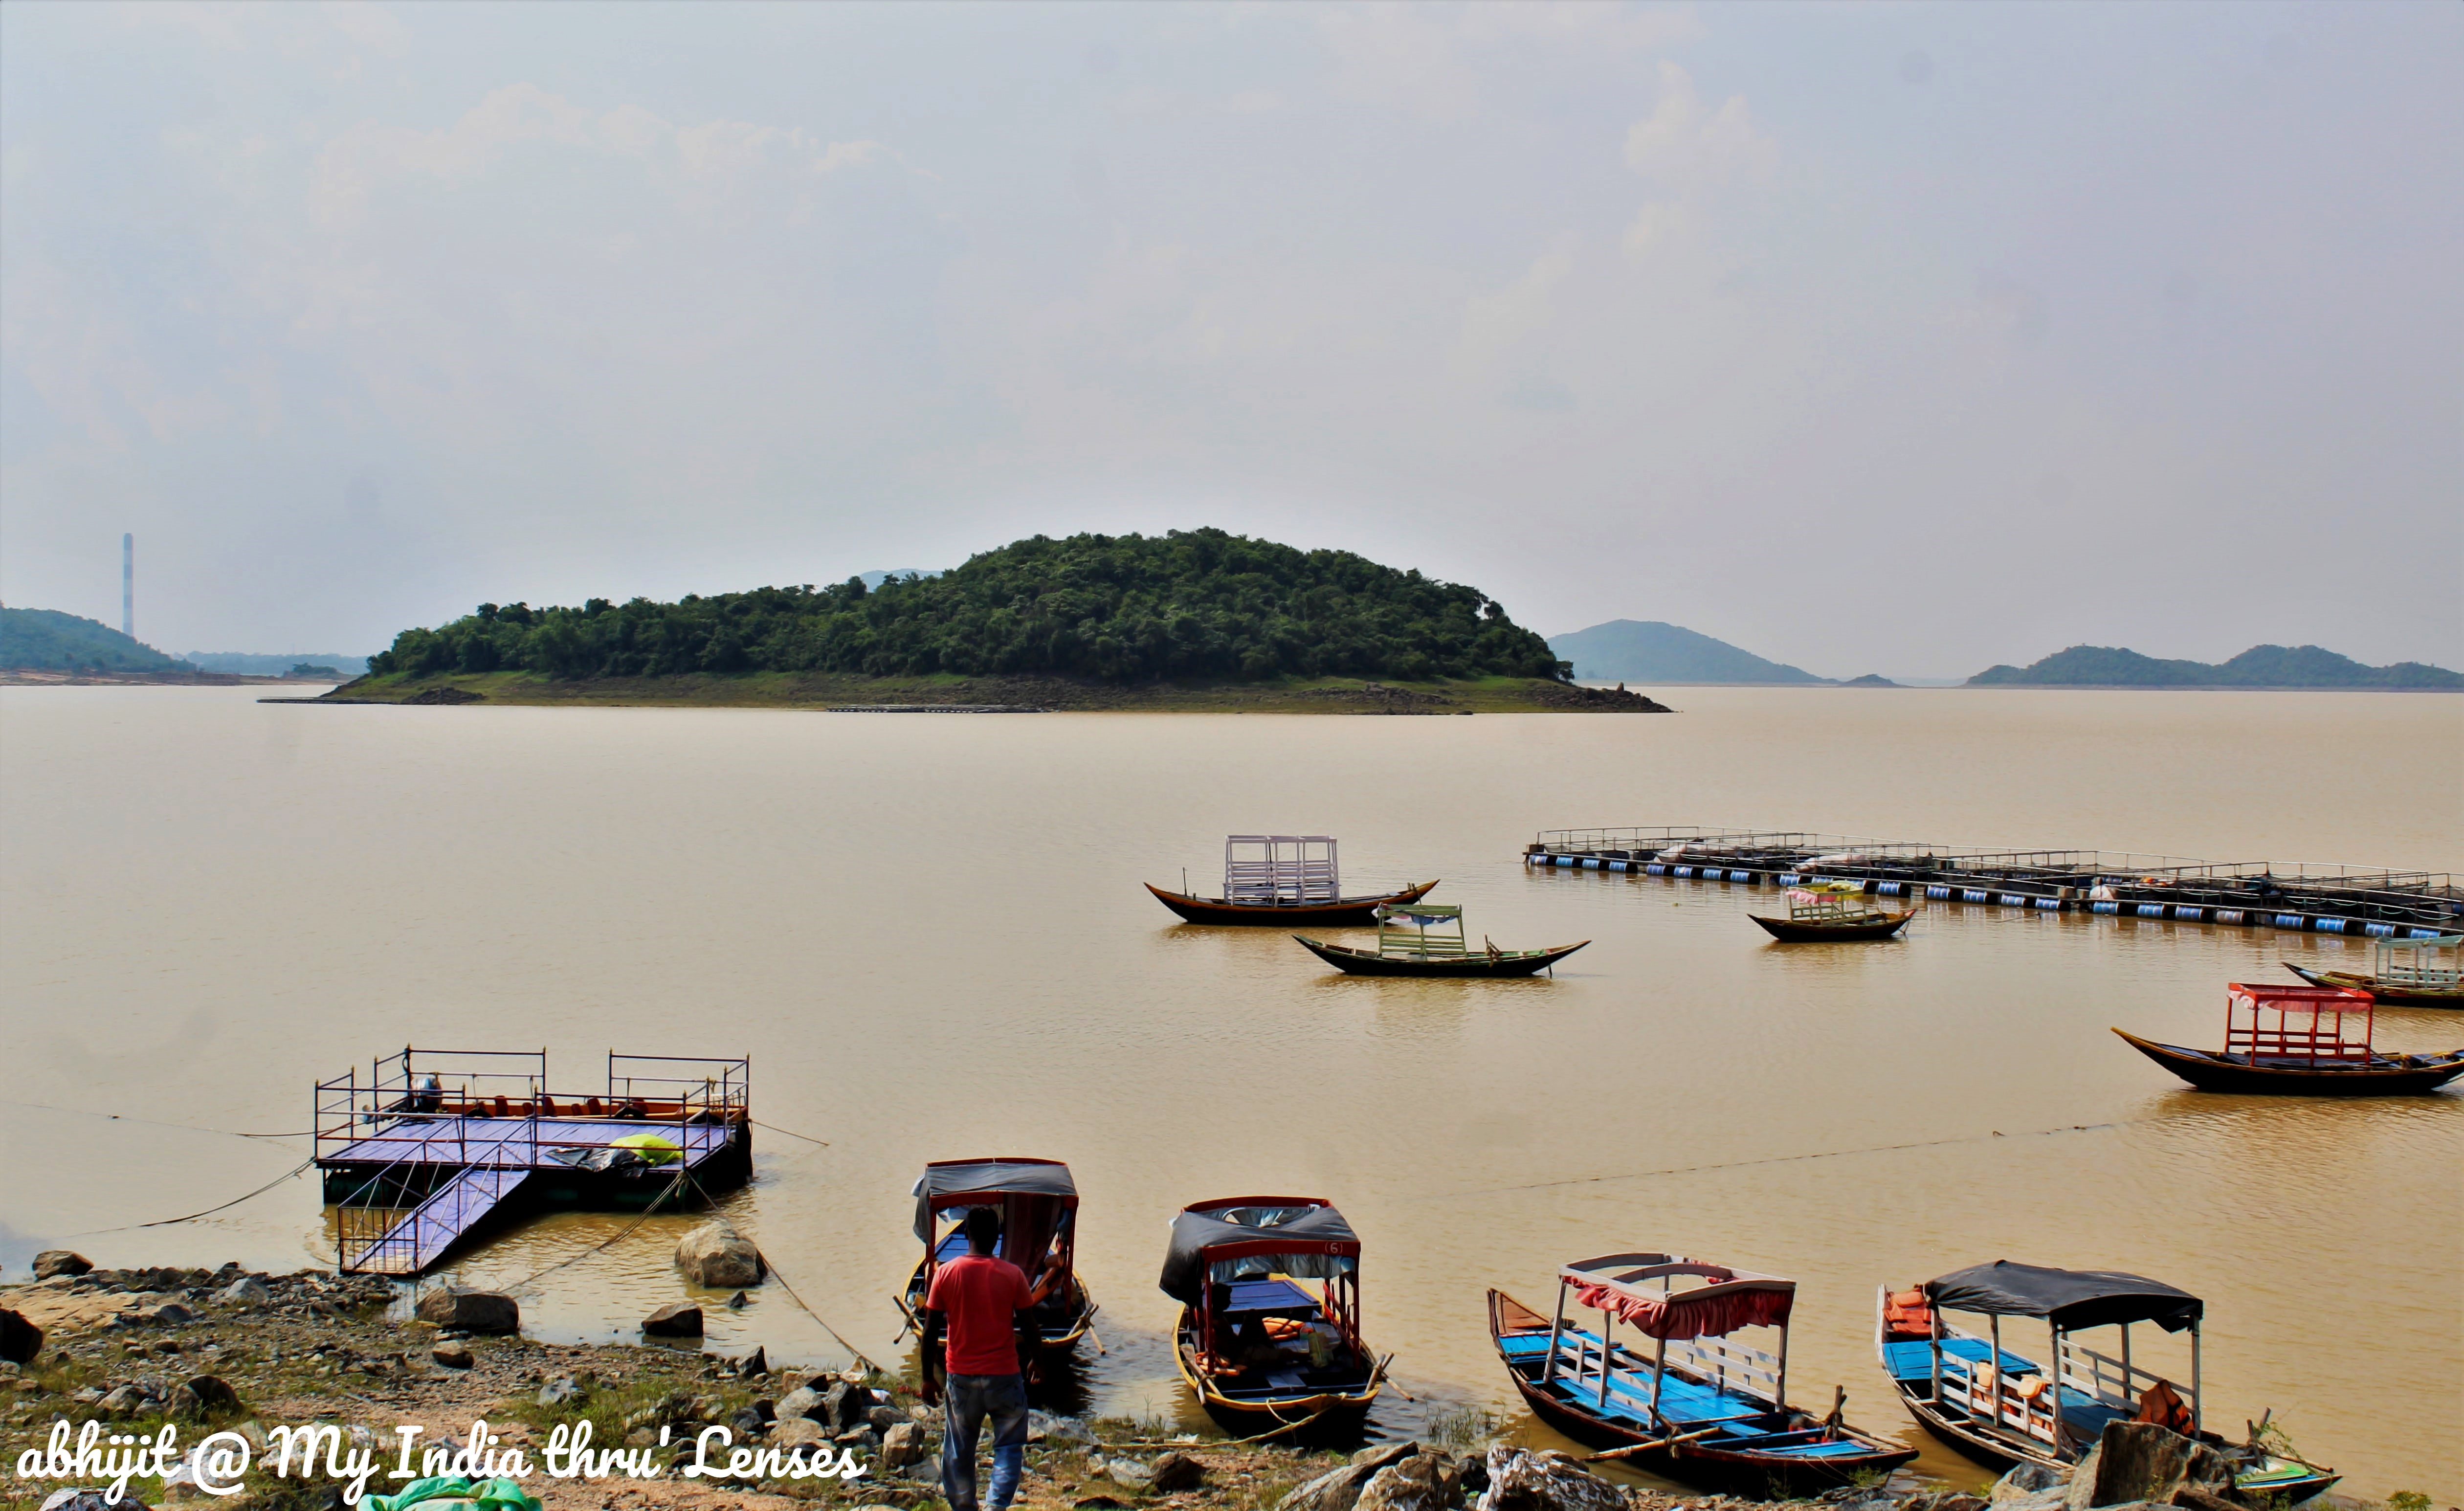 Maithon Lake has several small islands with Spoon Island at the centre. Boating Facilities are also available.